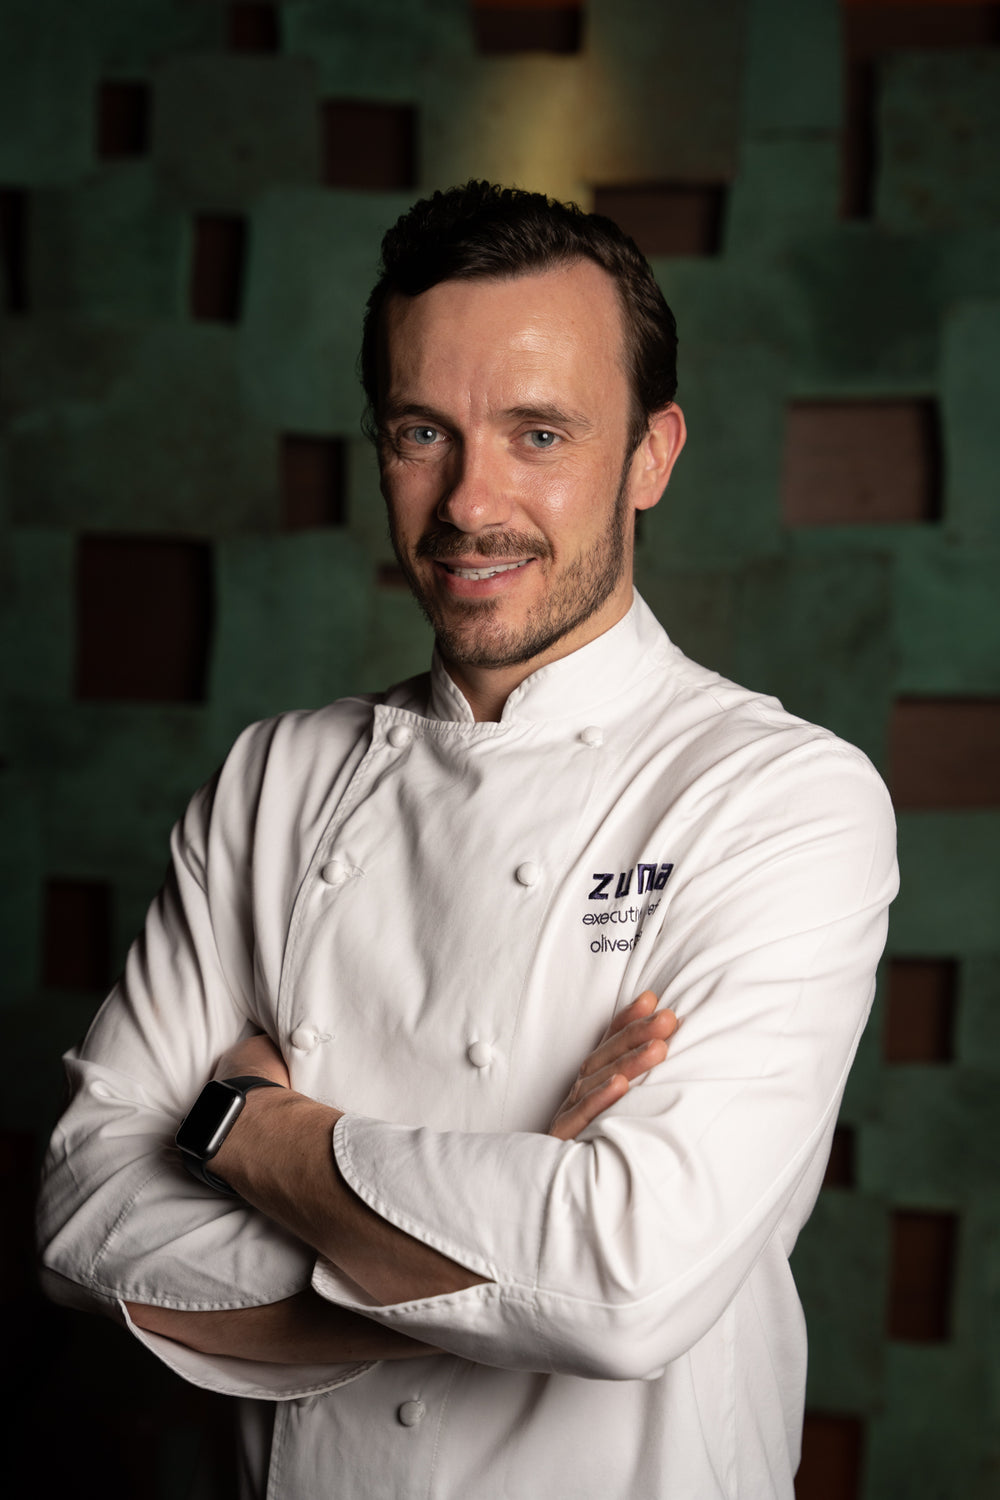 THE CHEF SERIES: Featuring Chef Oliver Lange, Zuma Restaurant Group